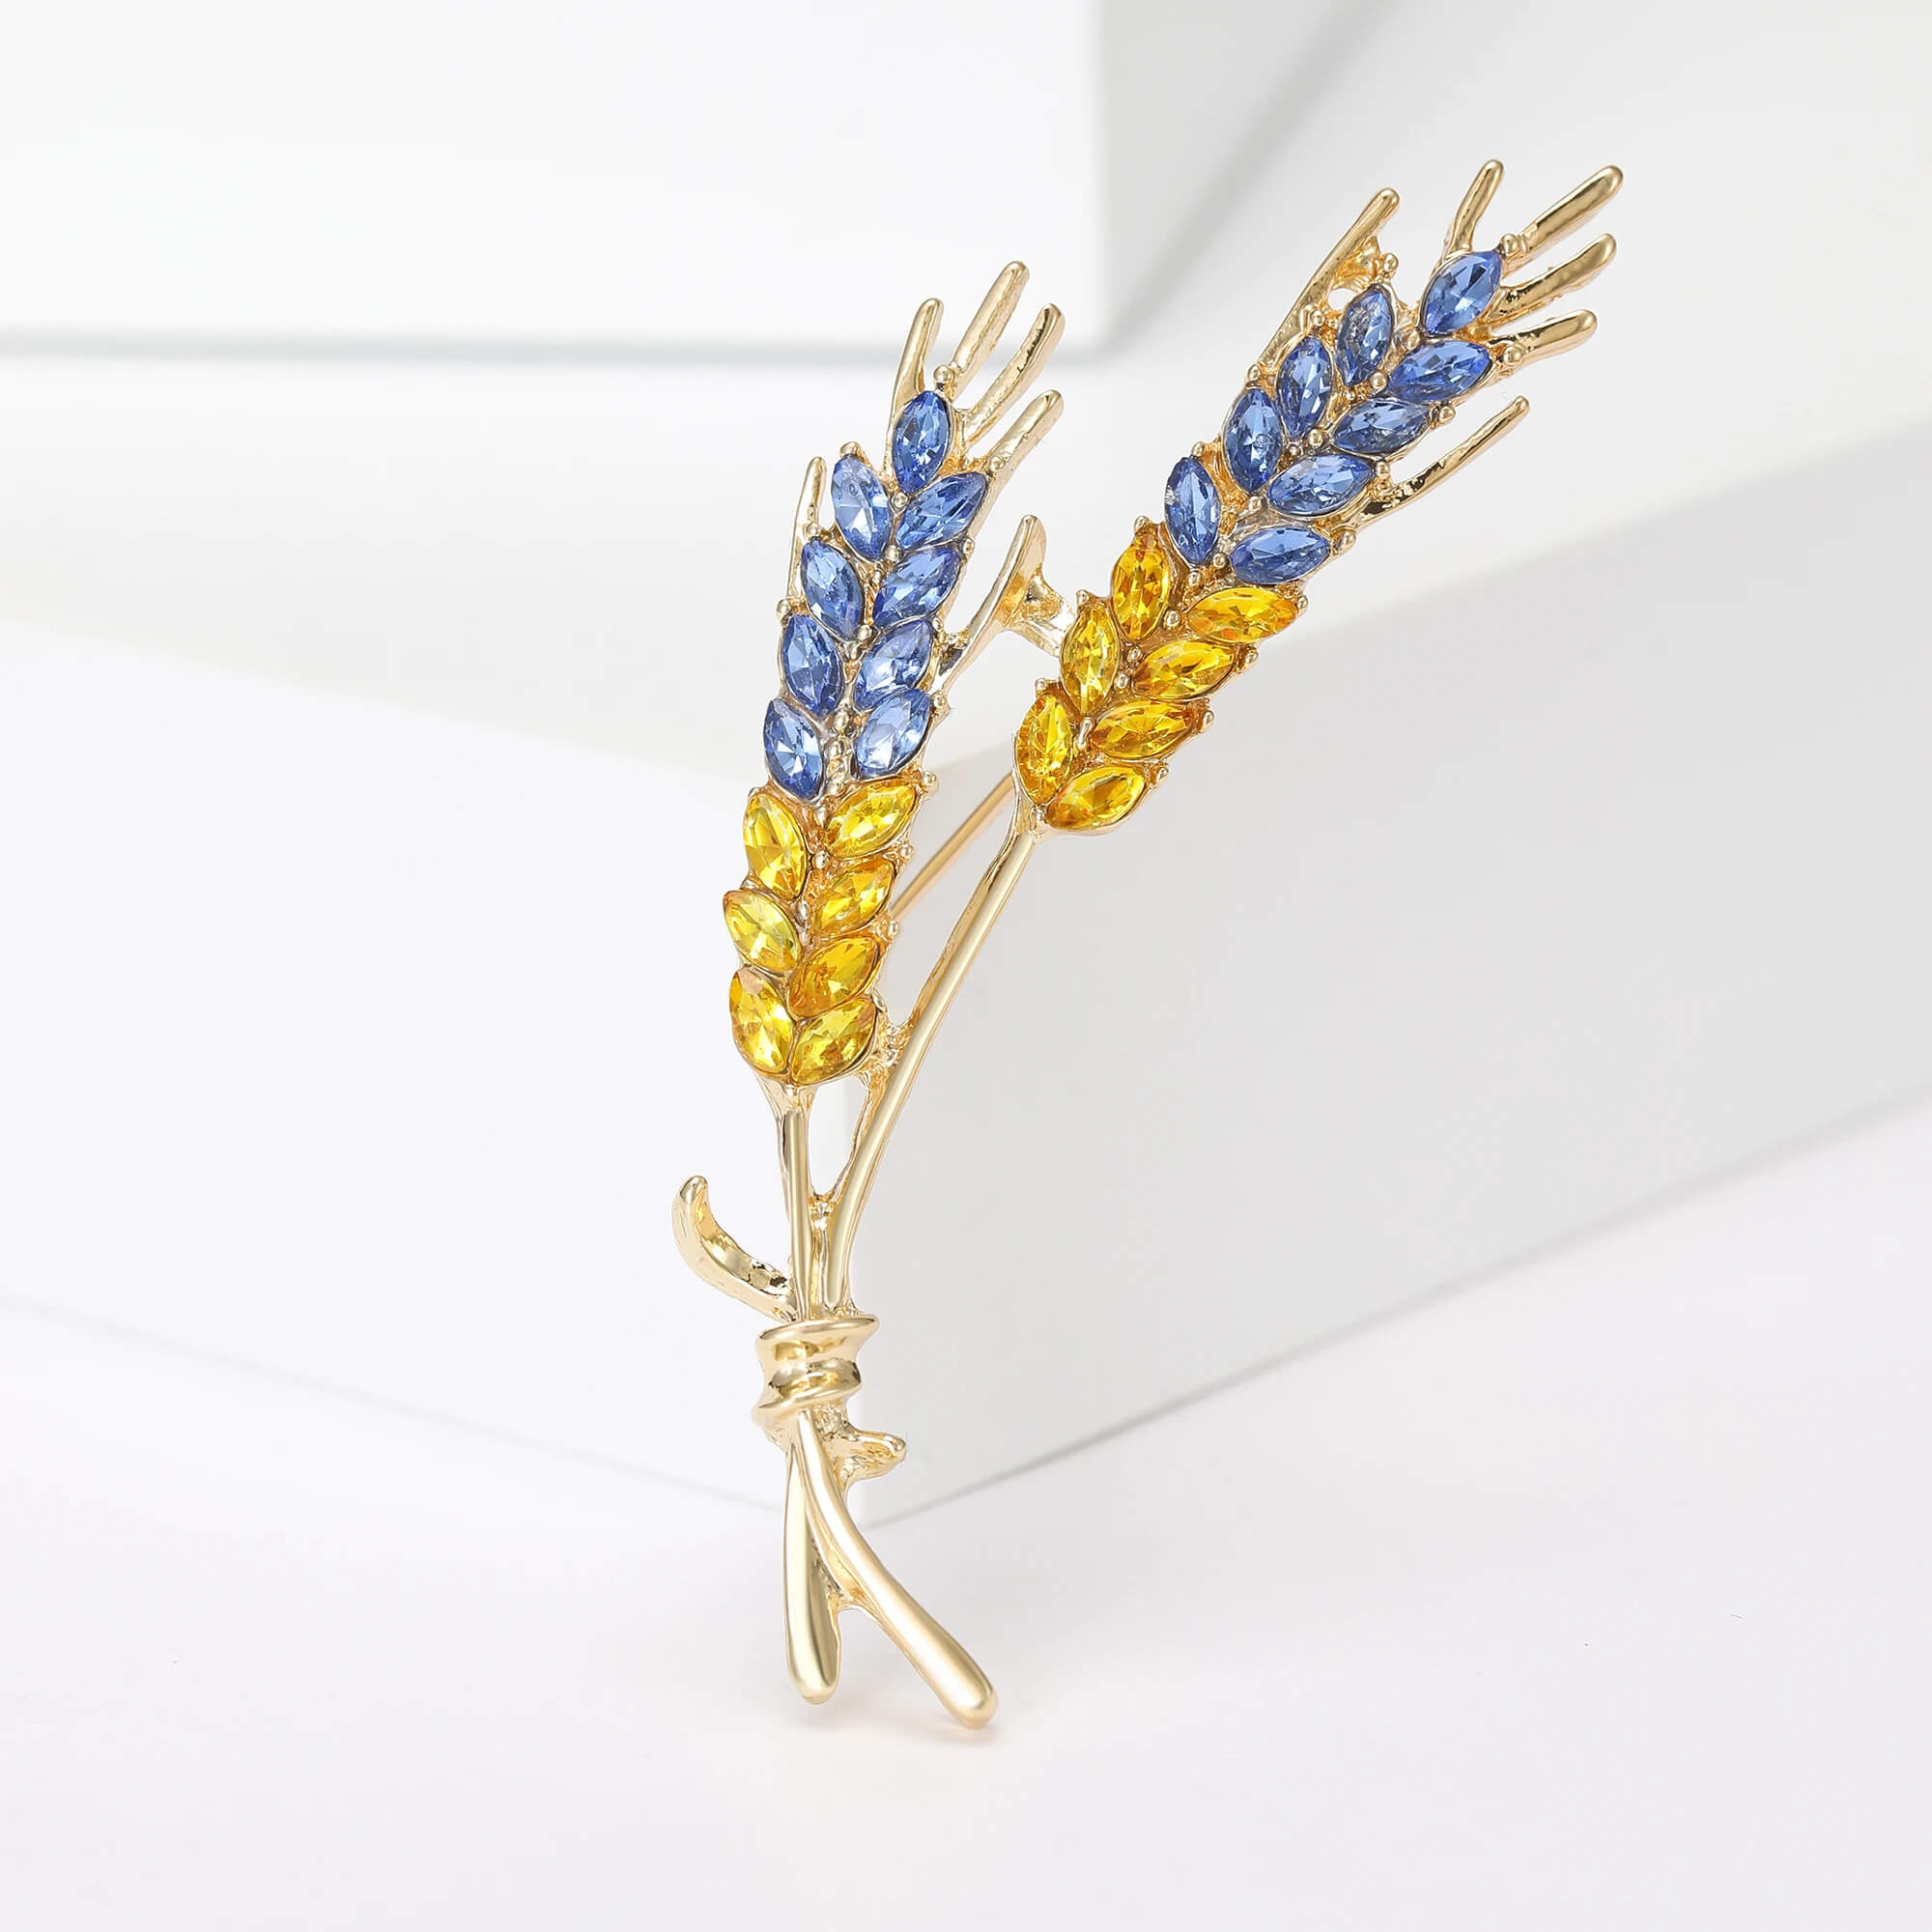 Ukraine Flag Gold-Toned Straw Brooch With Simulated Gemstones in Mixed Color - Mounteen